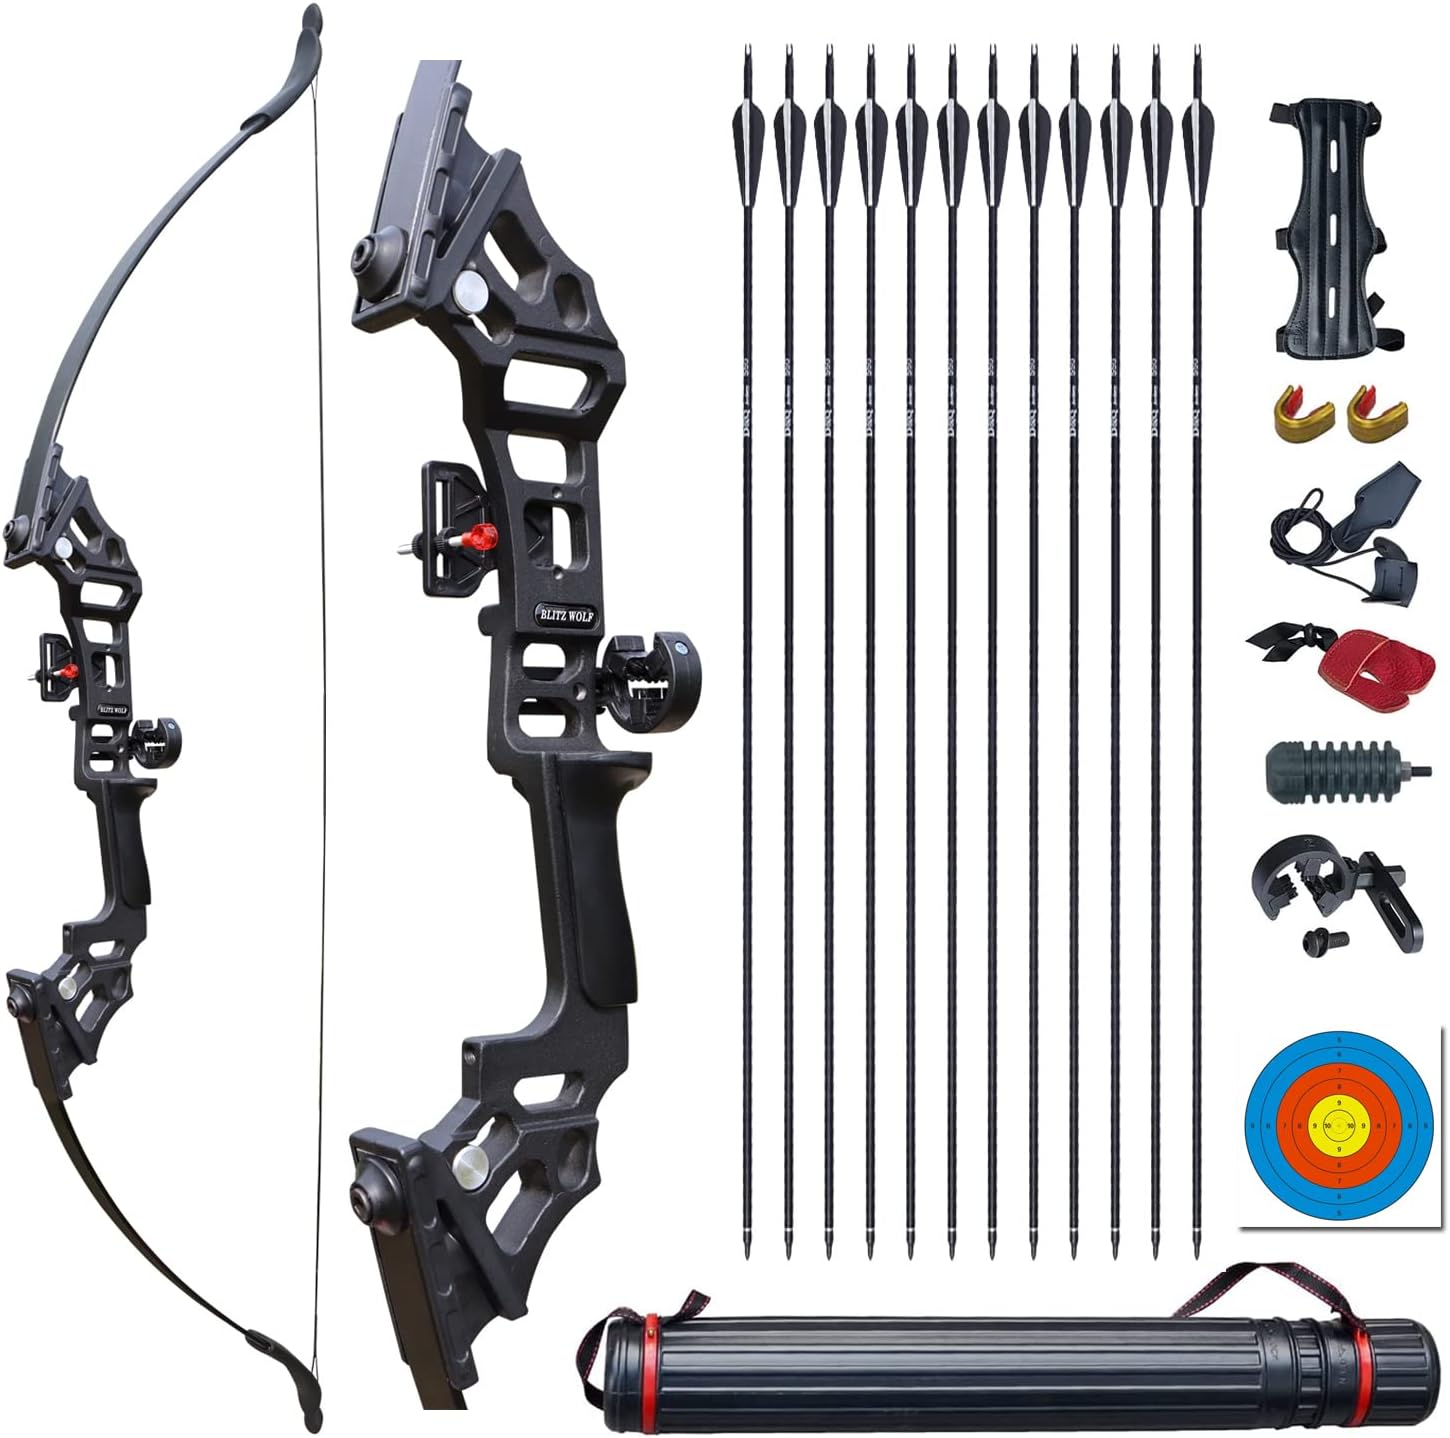 the IS-TONGTU Archery Bow Set an ideal choice for adult beginners who want to get started in archery.